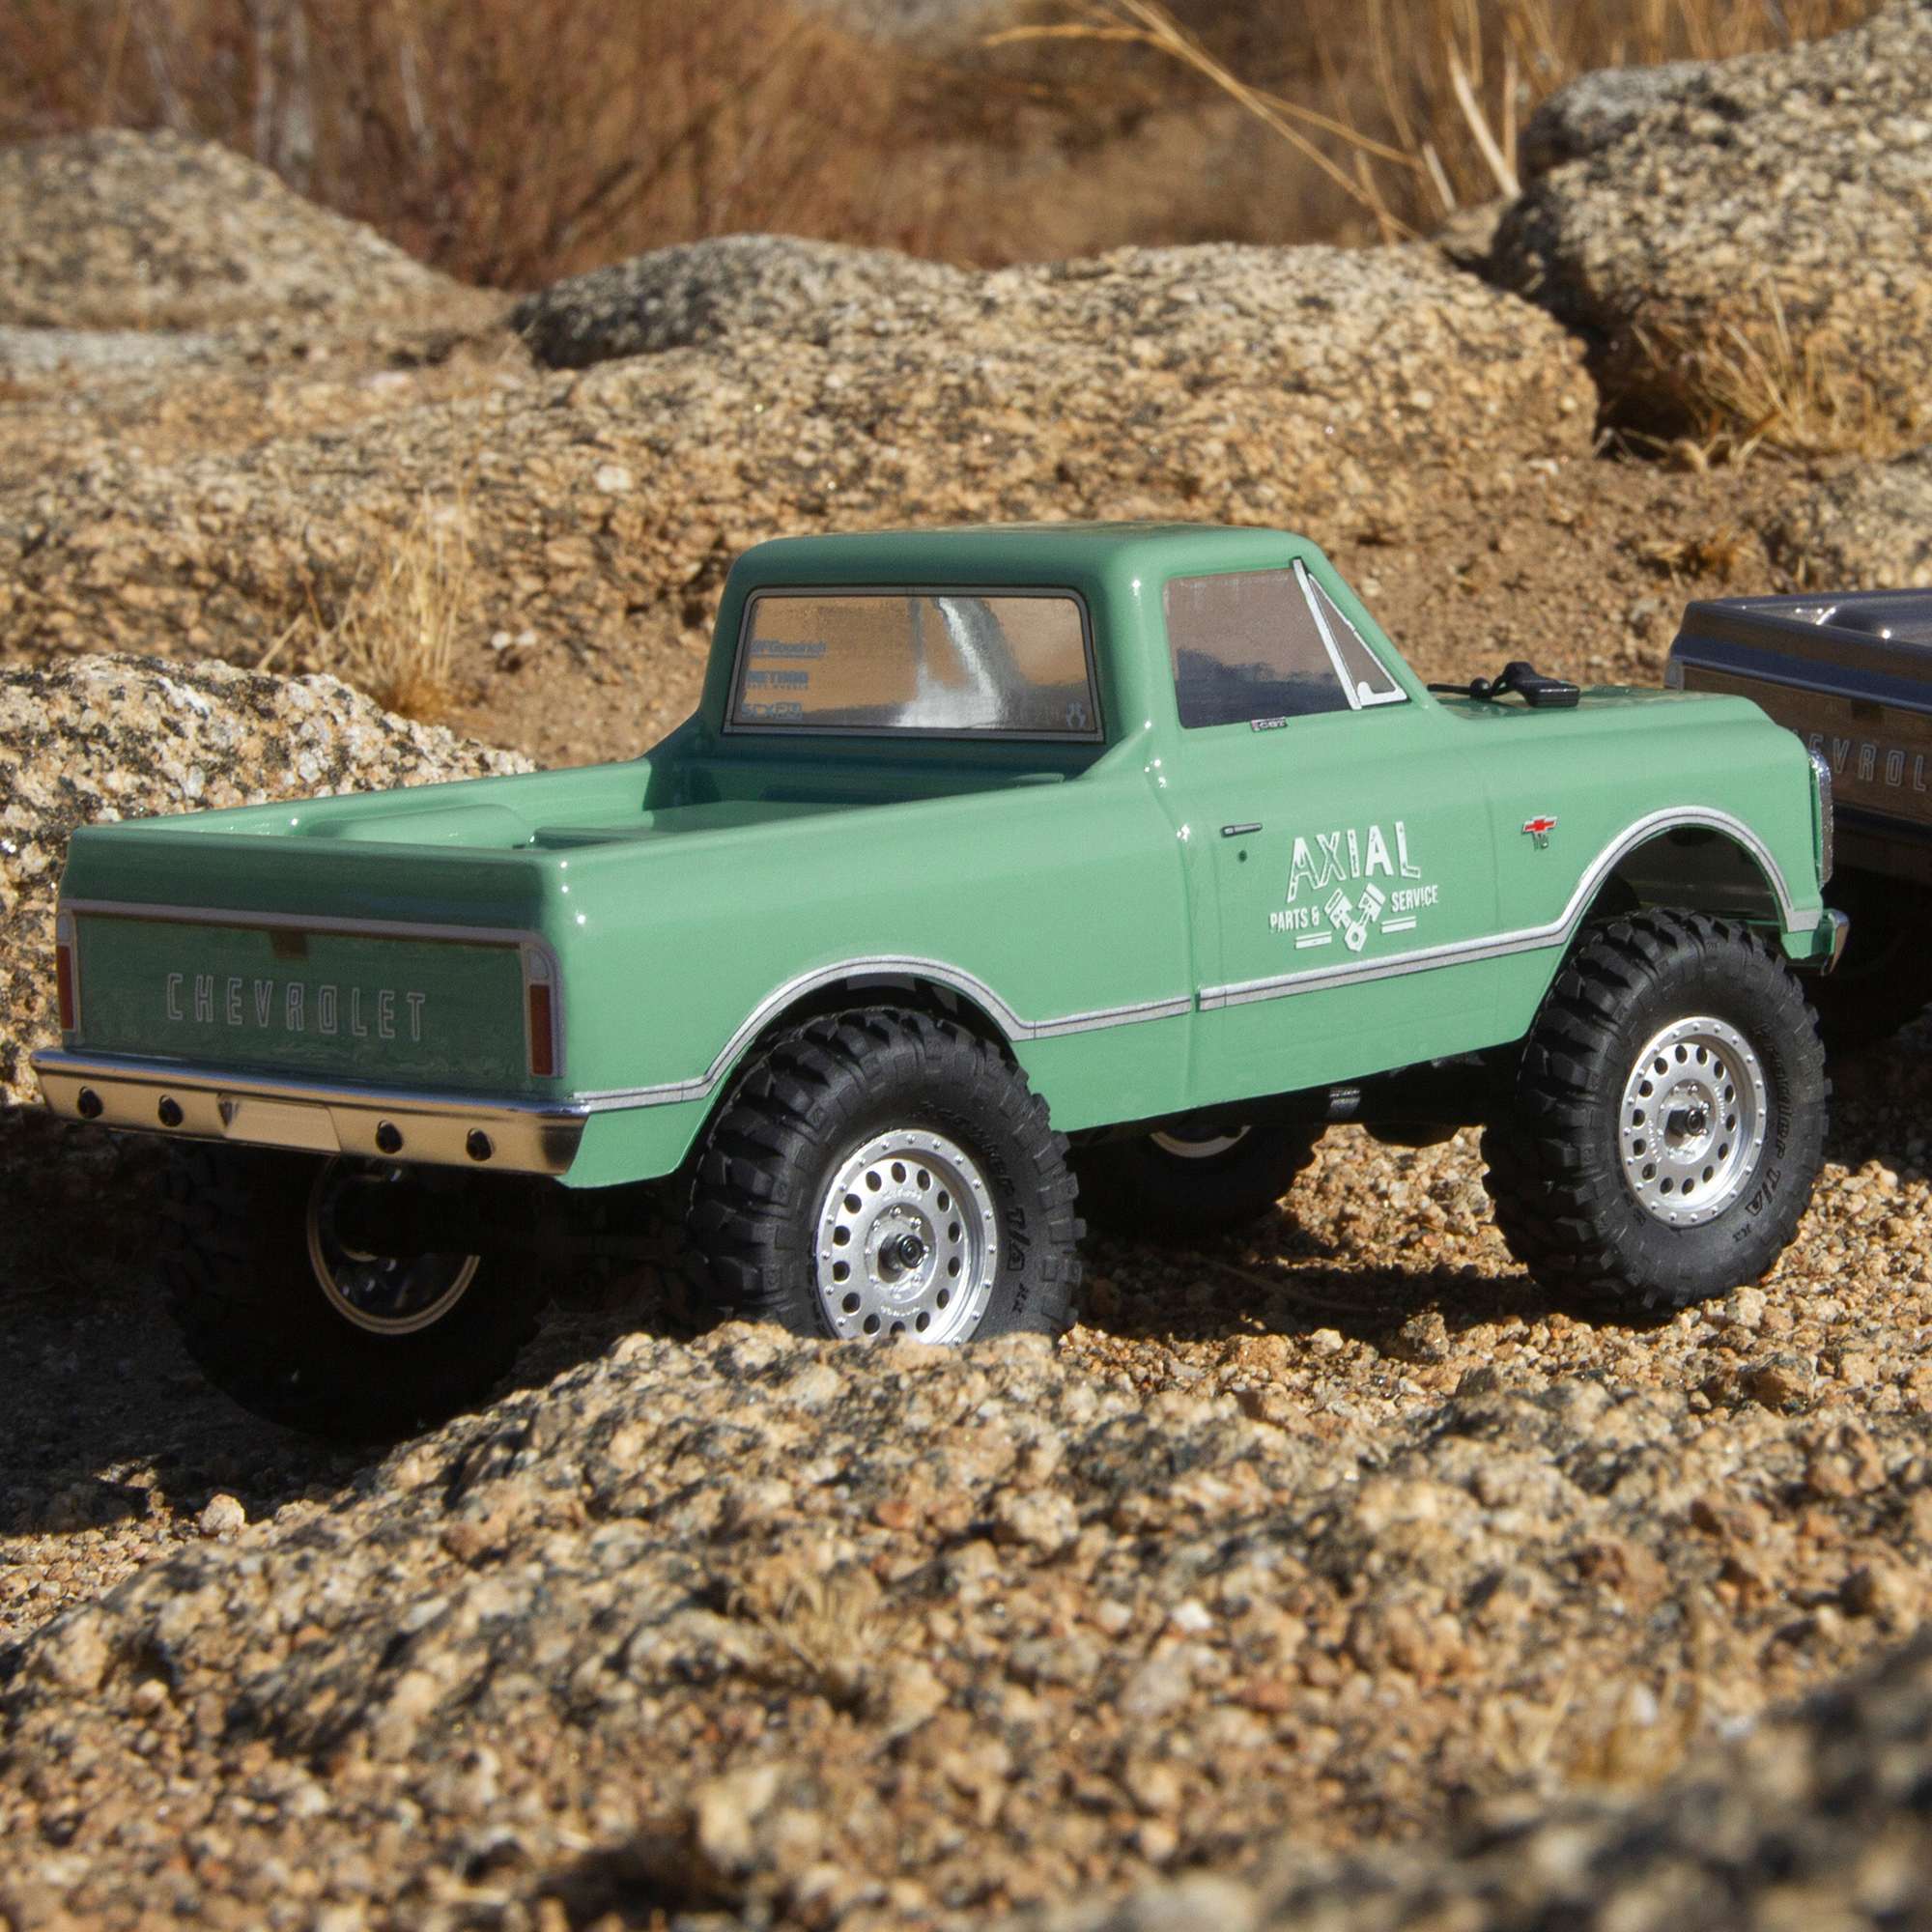 Axial 1/24 SCX24 1967 Chevrolet C10 4 Wheel Drive Truck Brushed RTR Ready to Run Green AXI00001T1 Trucks Electric RTR Other - image 5 of 9